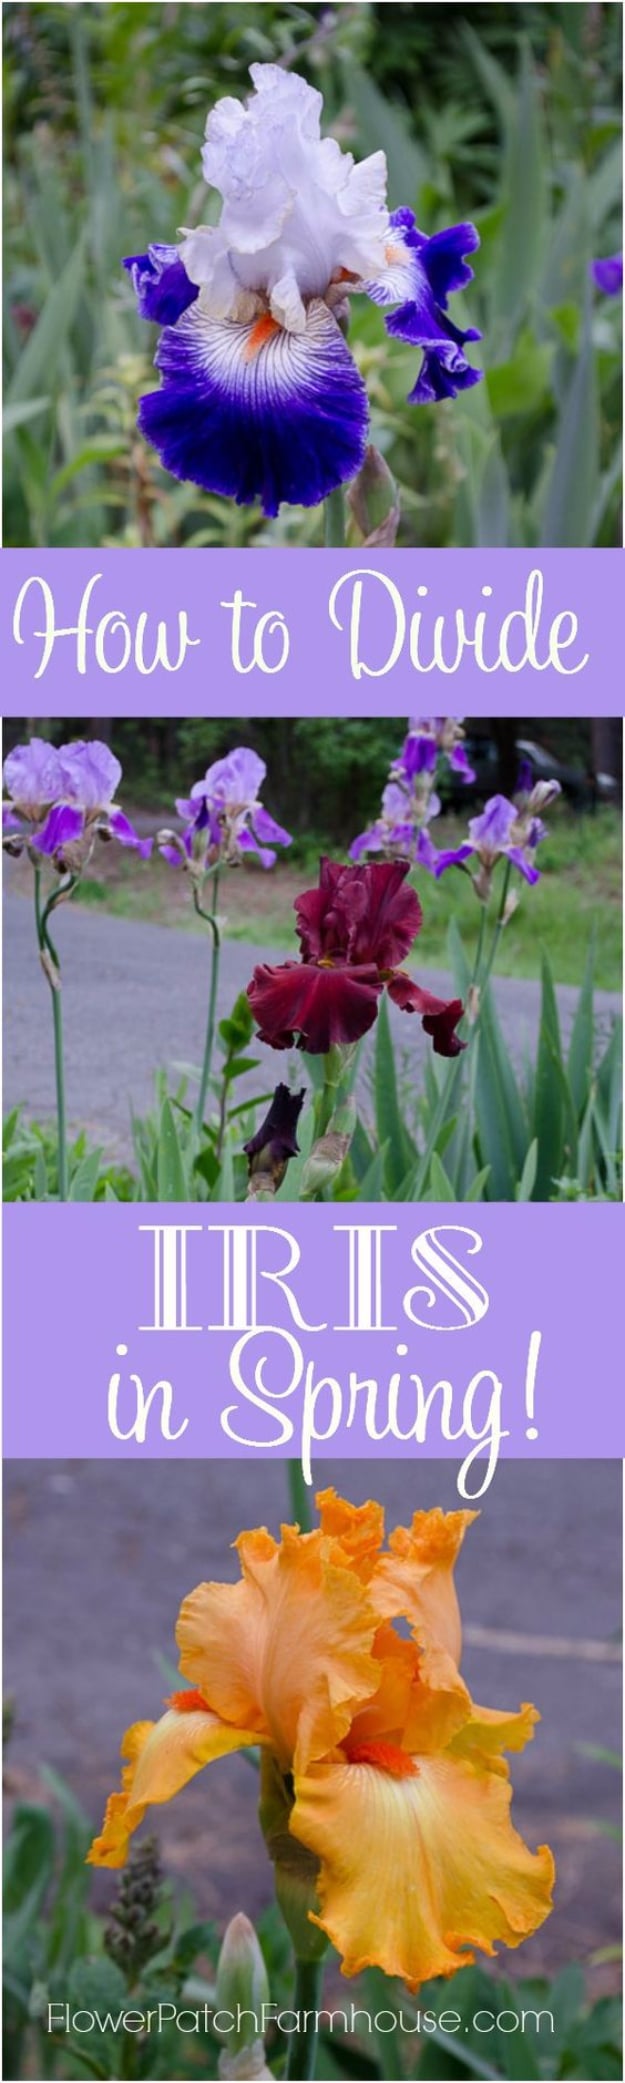 DIY Spring Gardening Projects - Divide Iris in Spring - Cool and Easy Planting Tips for Spring Garden - Step by Step Tutorials for Growing Seeds, Plants, Vegetables and Flowers in You Yard - DIY Project Ideas for Women and Men - Creative and Quick Backyard Ideas For Summer 